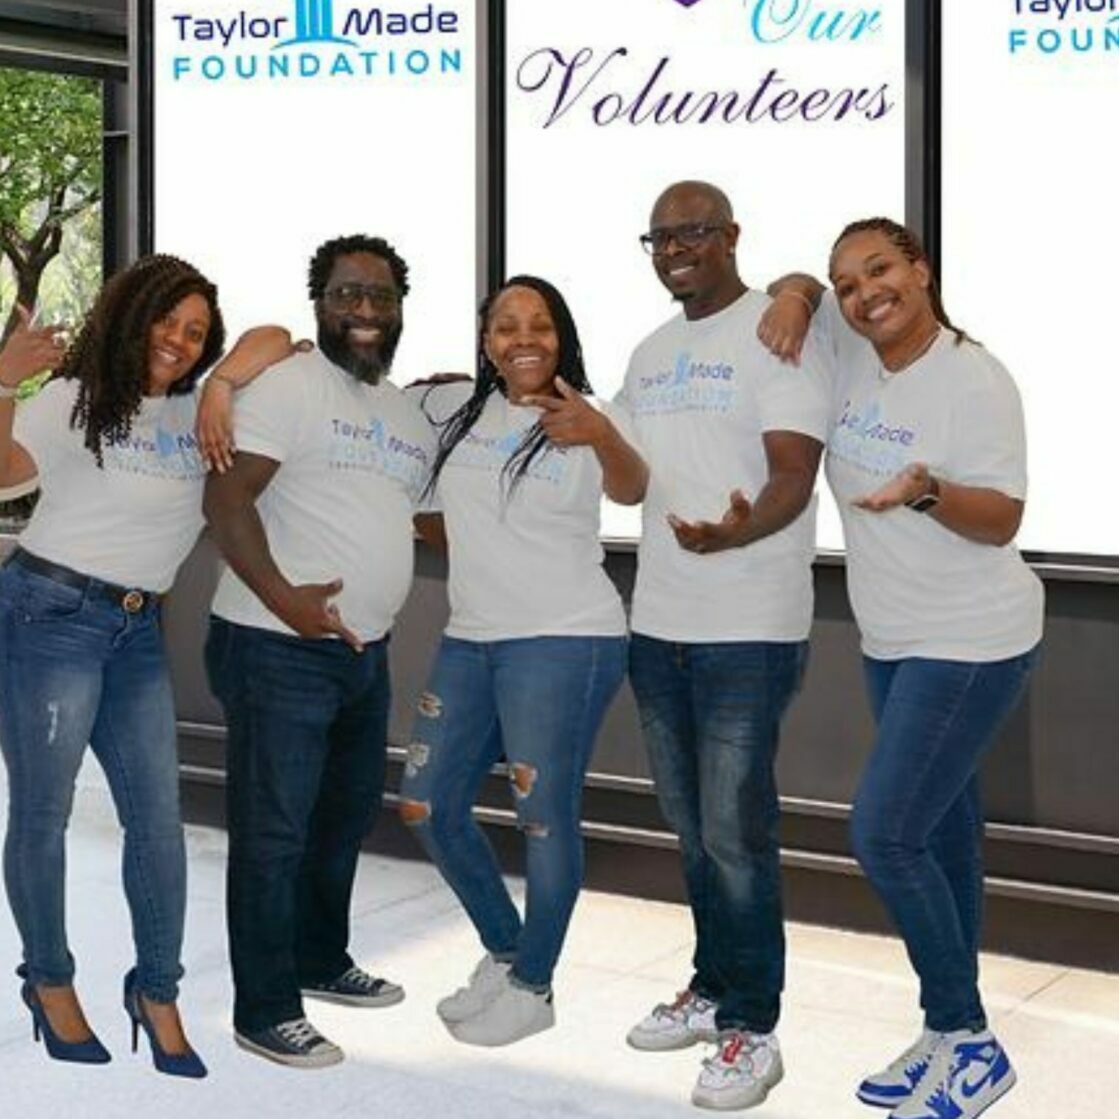 Volunteers at Taylor made foundation event